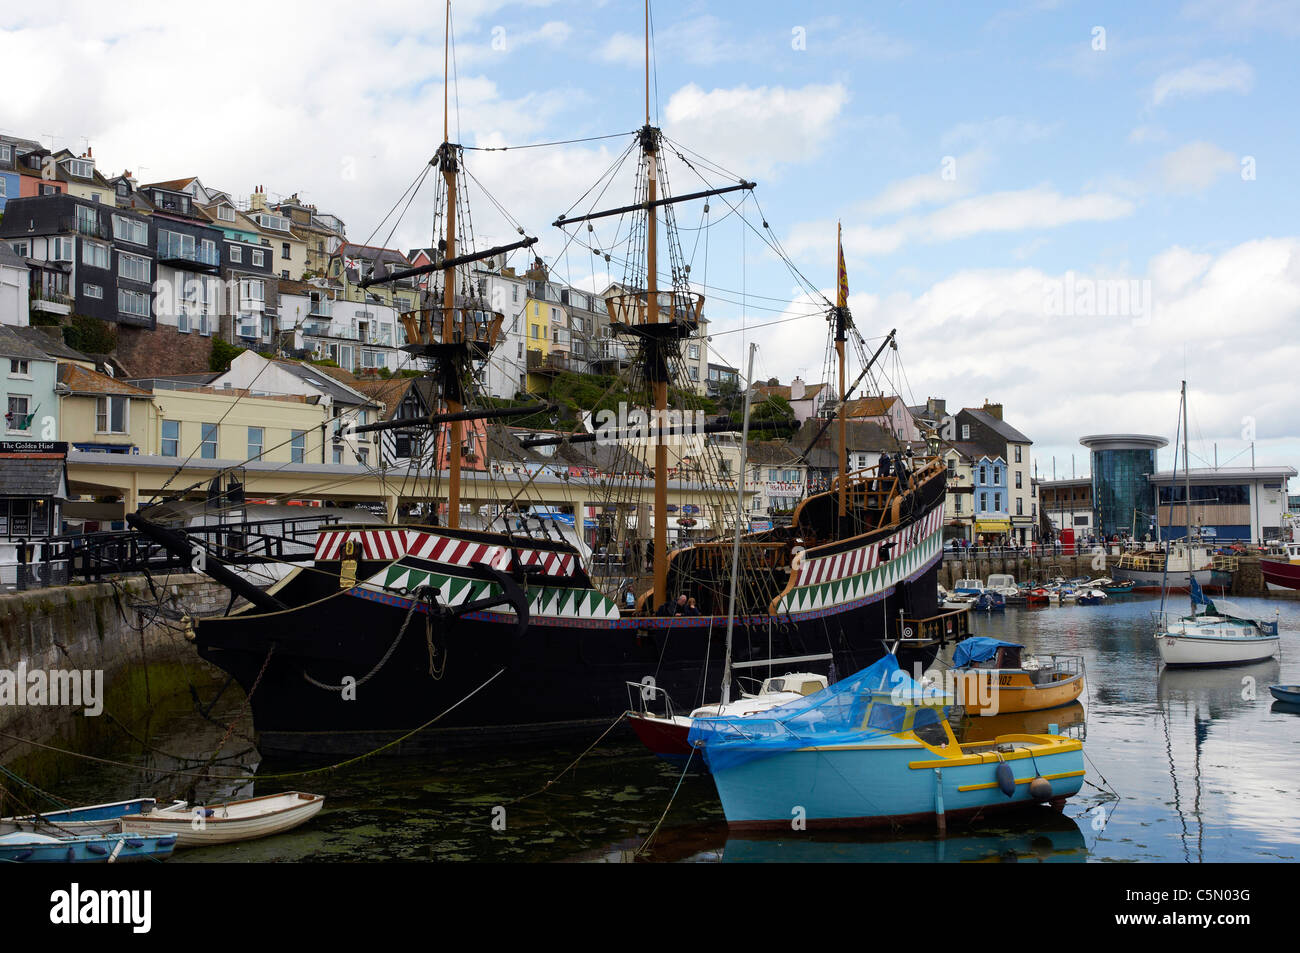 Replica of Francis Drake's ship the Golden Hind in Brixham harbour, Devon, England Stock Photo